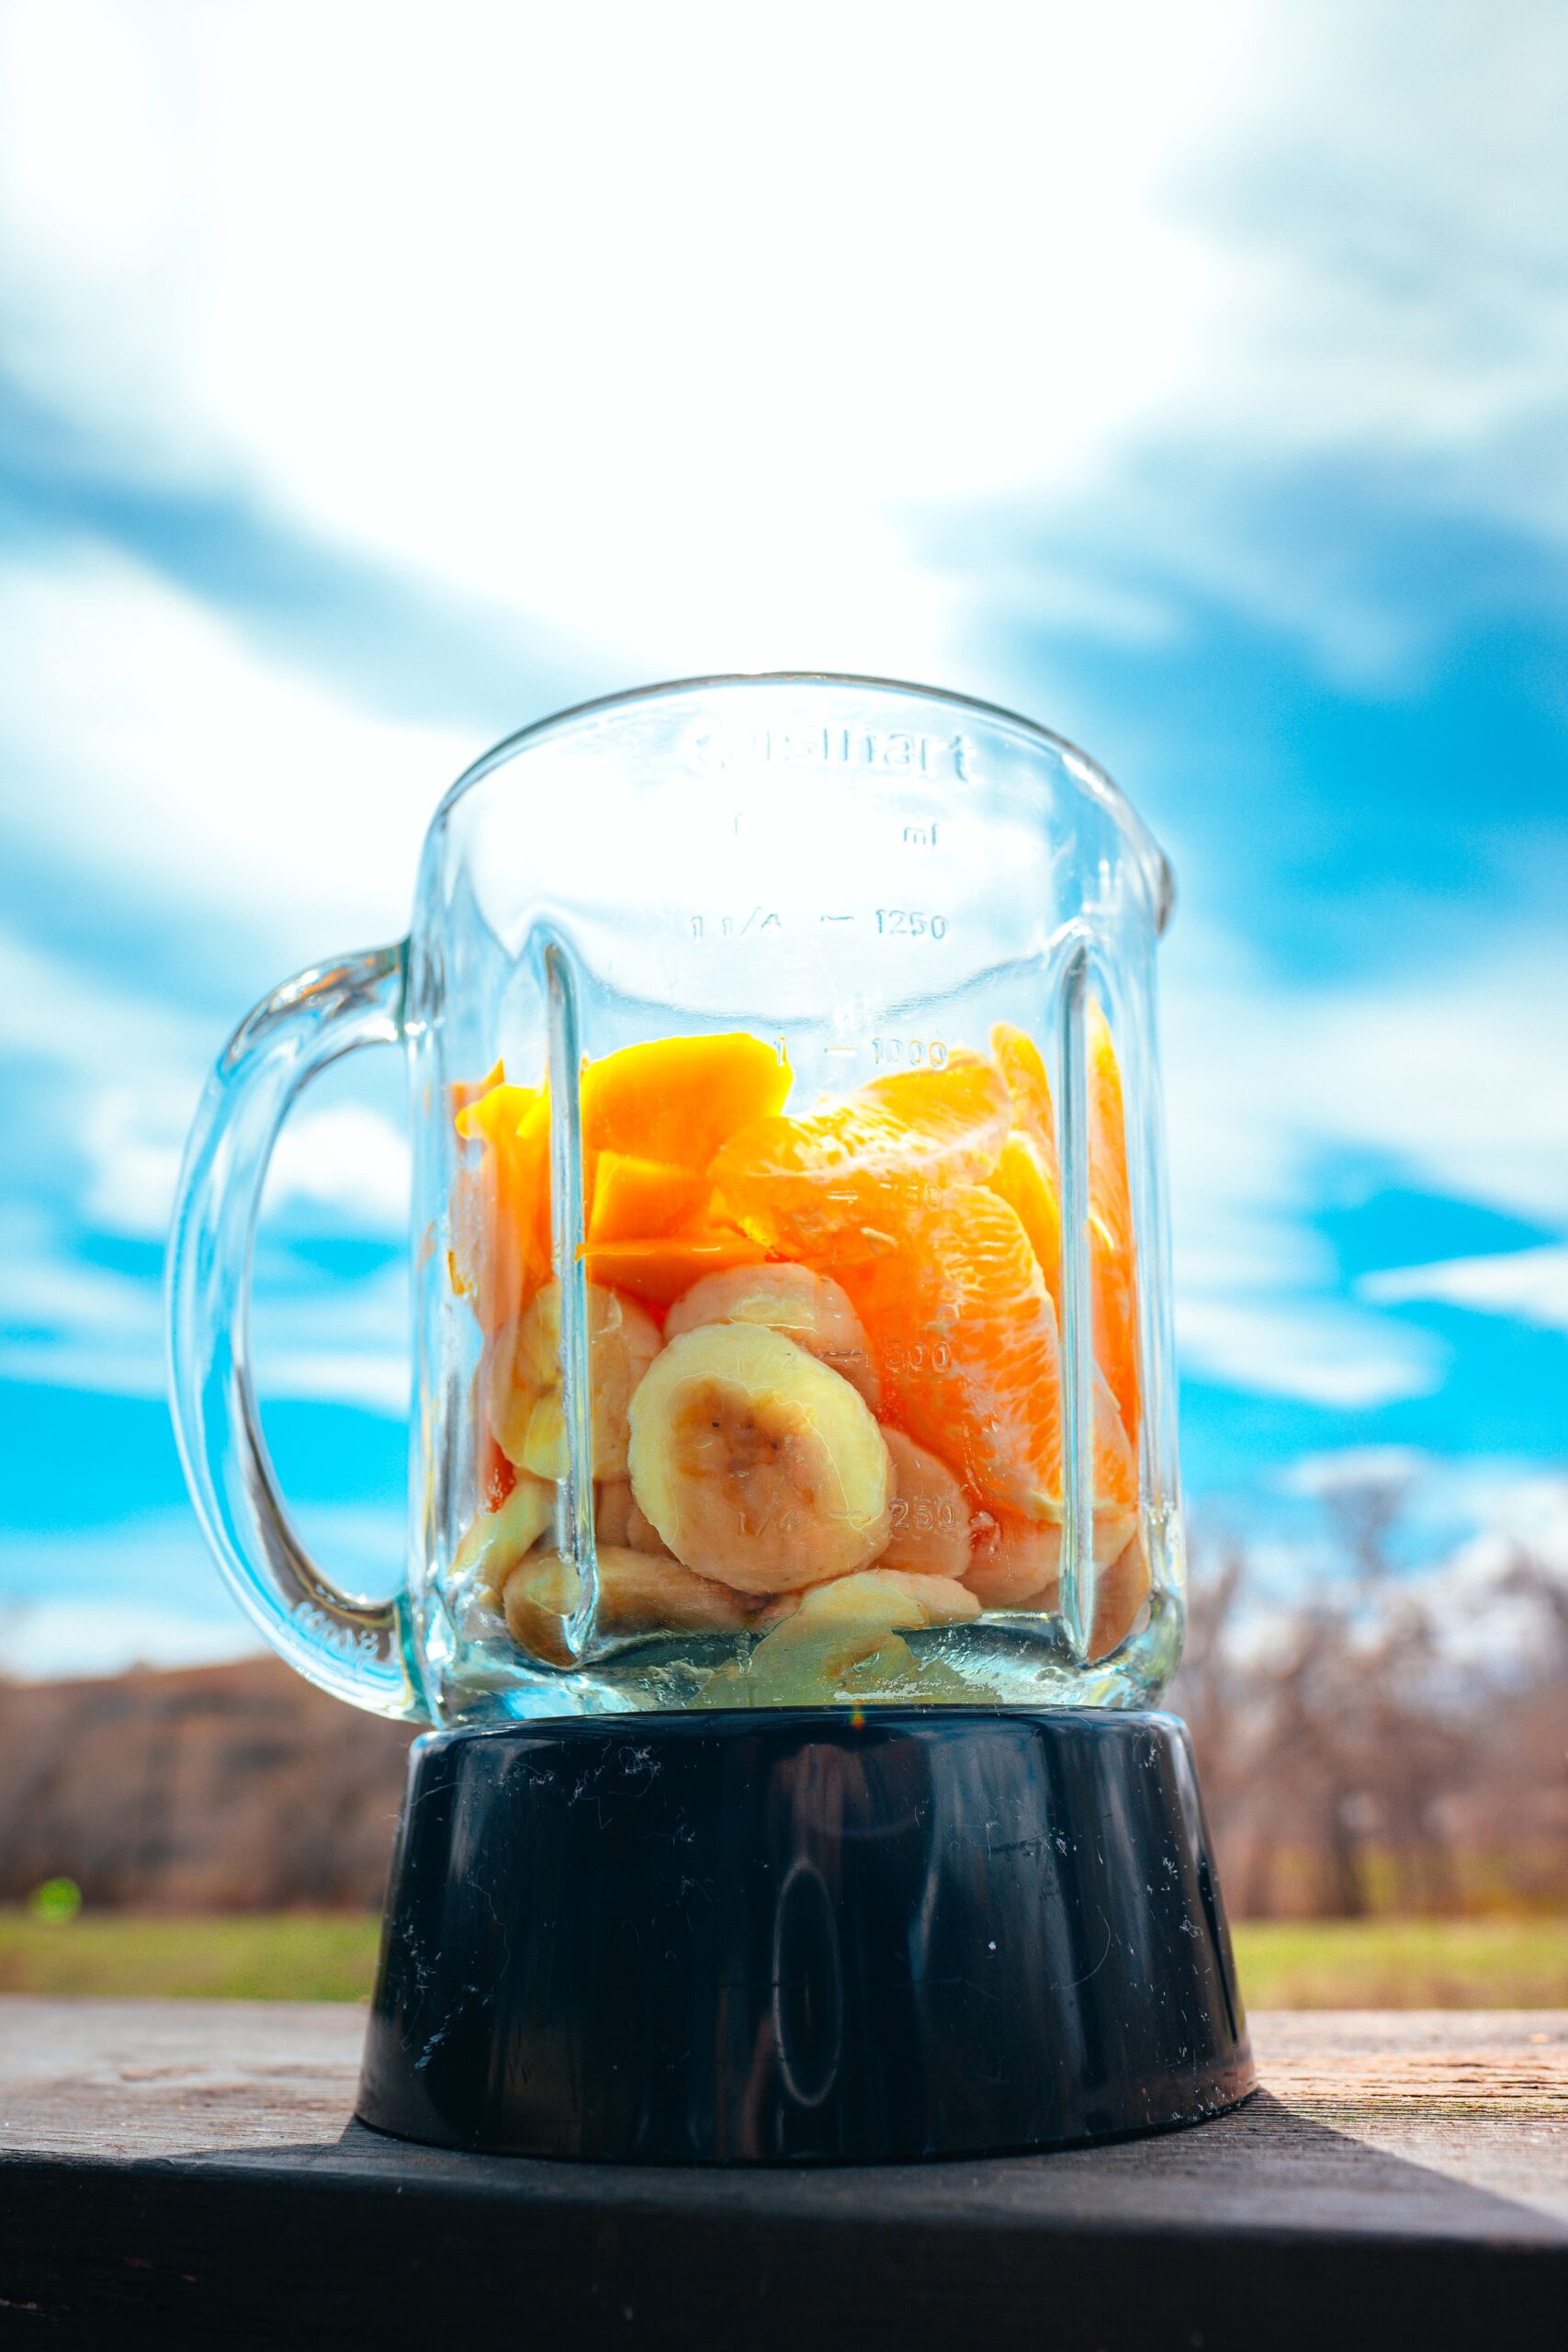 A photo of a blender filled with sliced banana and oranges taken from an upwards angle. The blender lacks a lid, and is placed outside in front of a bright blue sky.